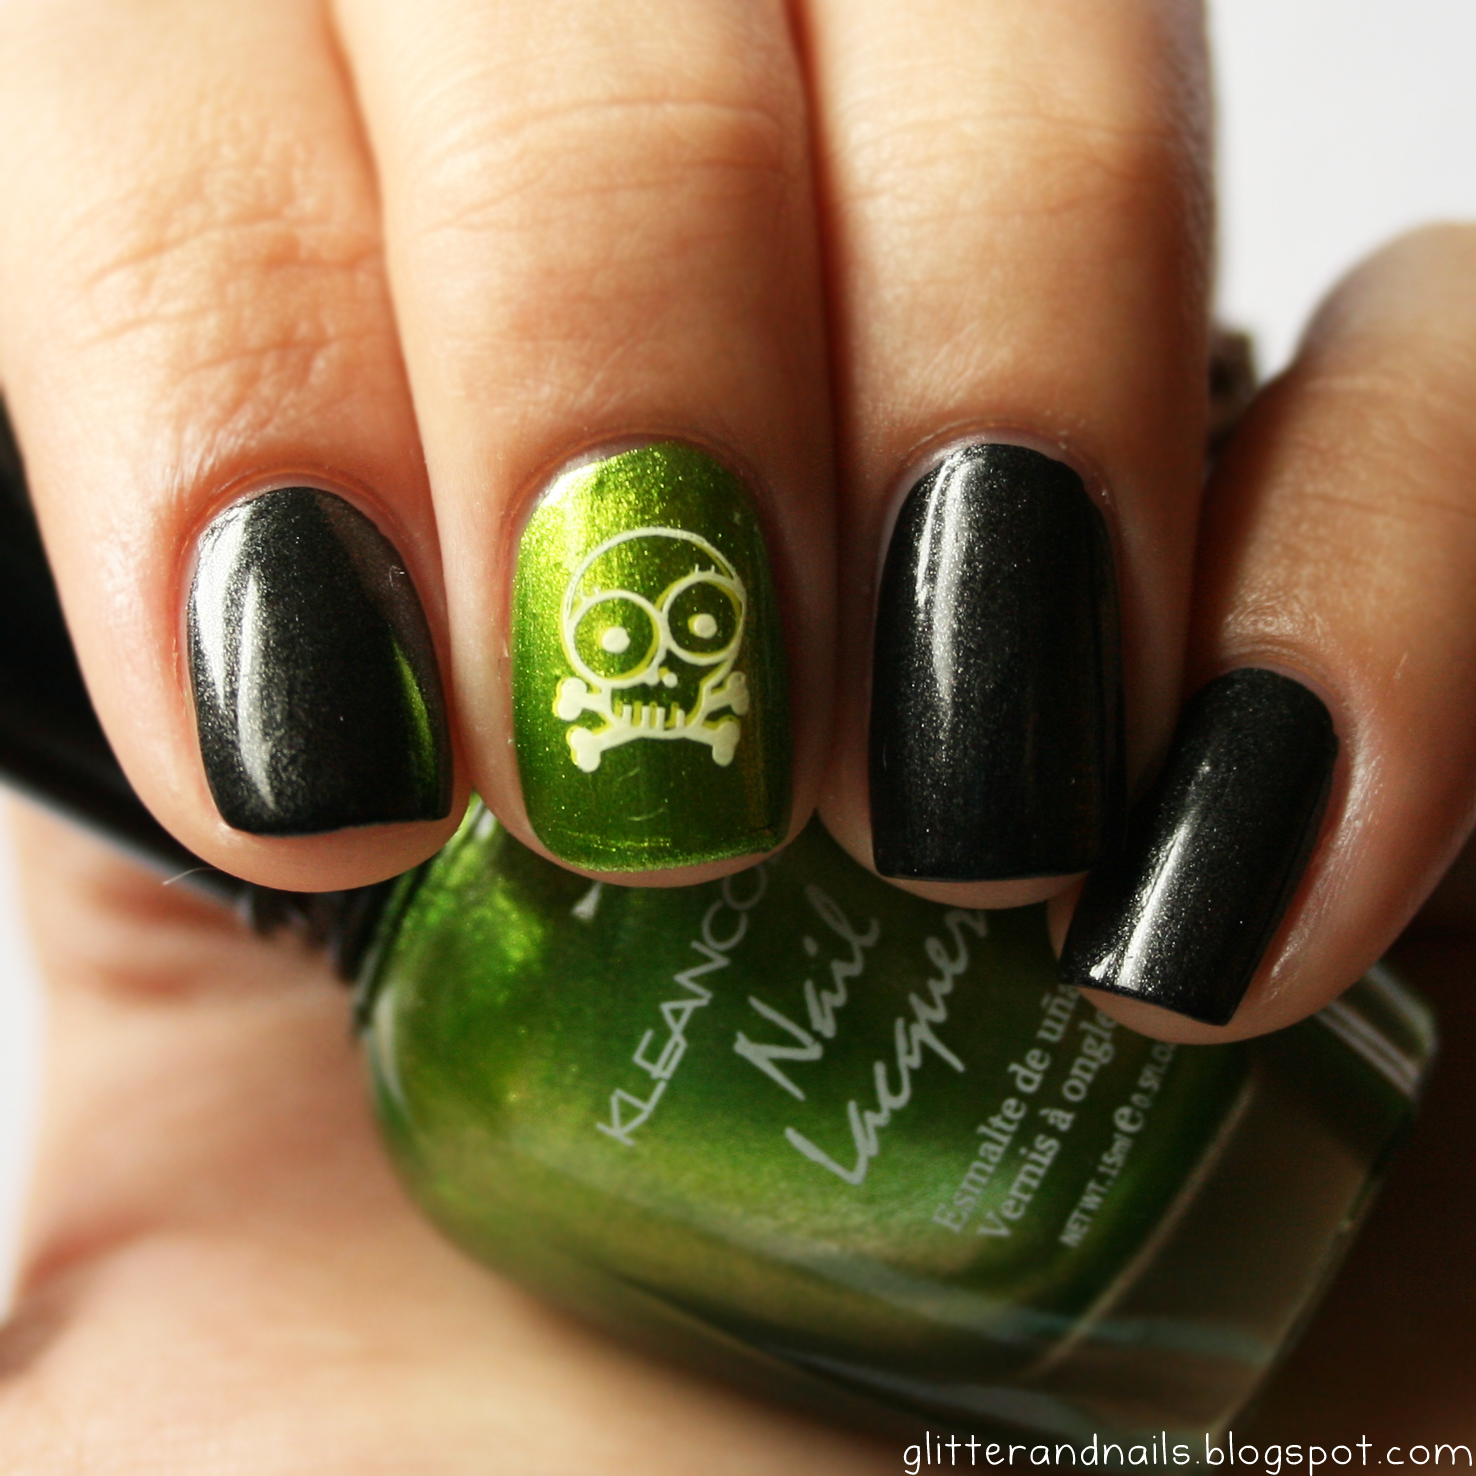 Glitter and Nails: Kleancolor Metallic Black + Green